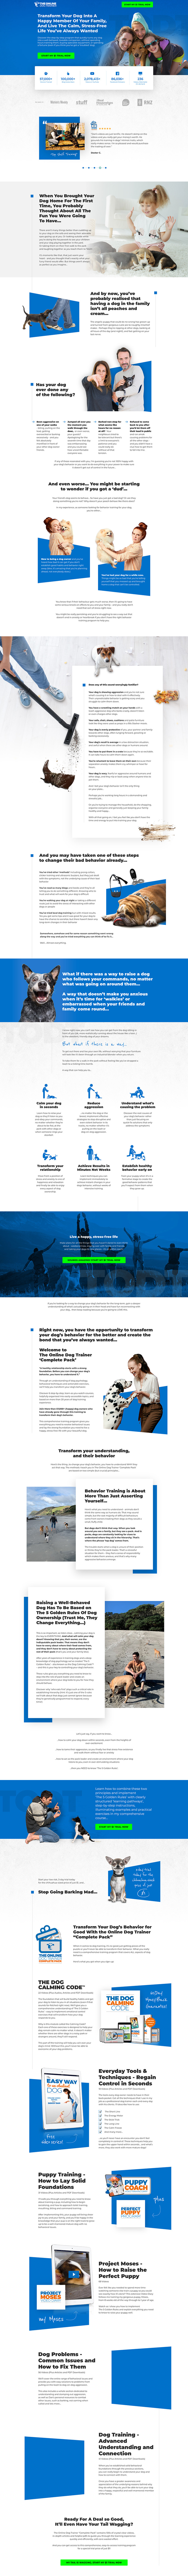 THE ONLINE DOG TRAINER - MEMBERSHIP LANDING PAGE